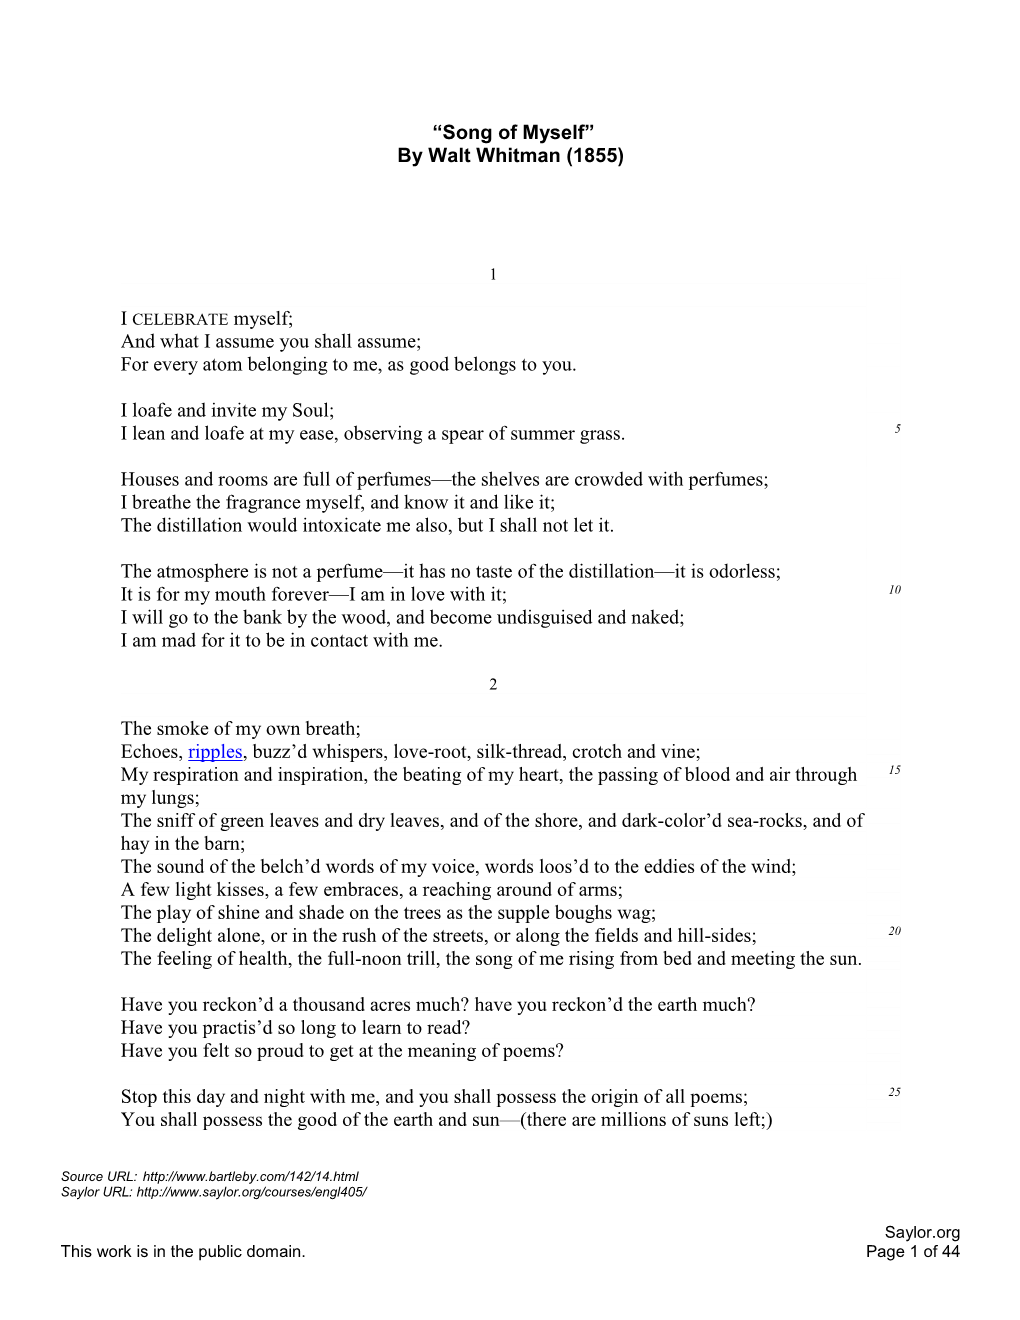 “Song of Myself” by Walt Whitman (1855) and What I Assume You Shall